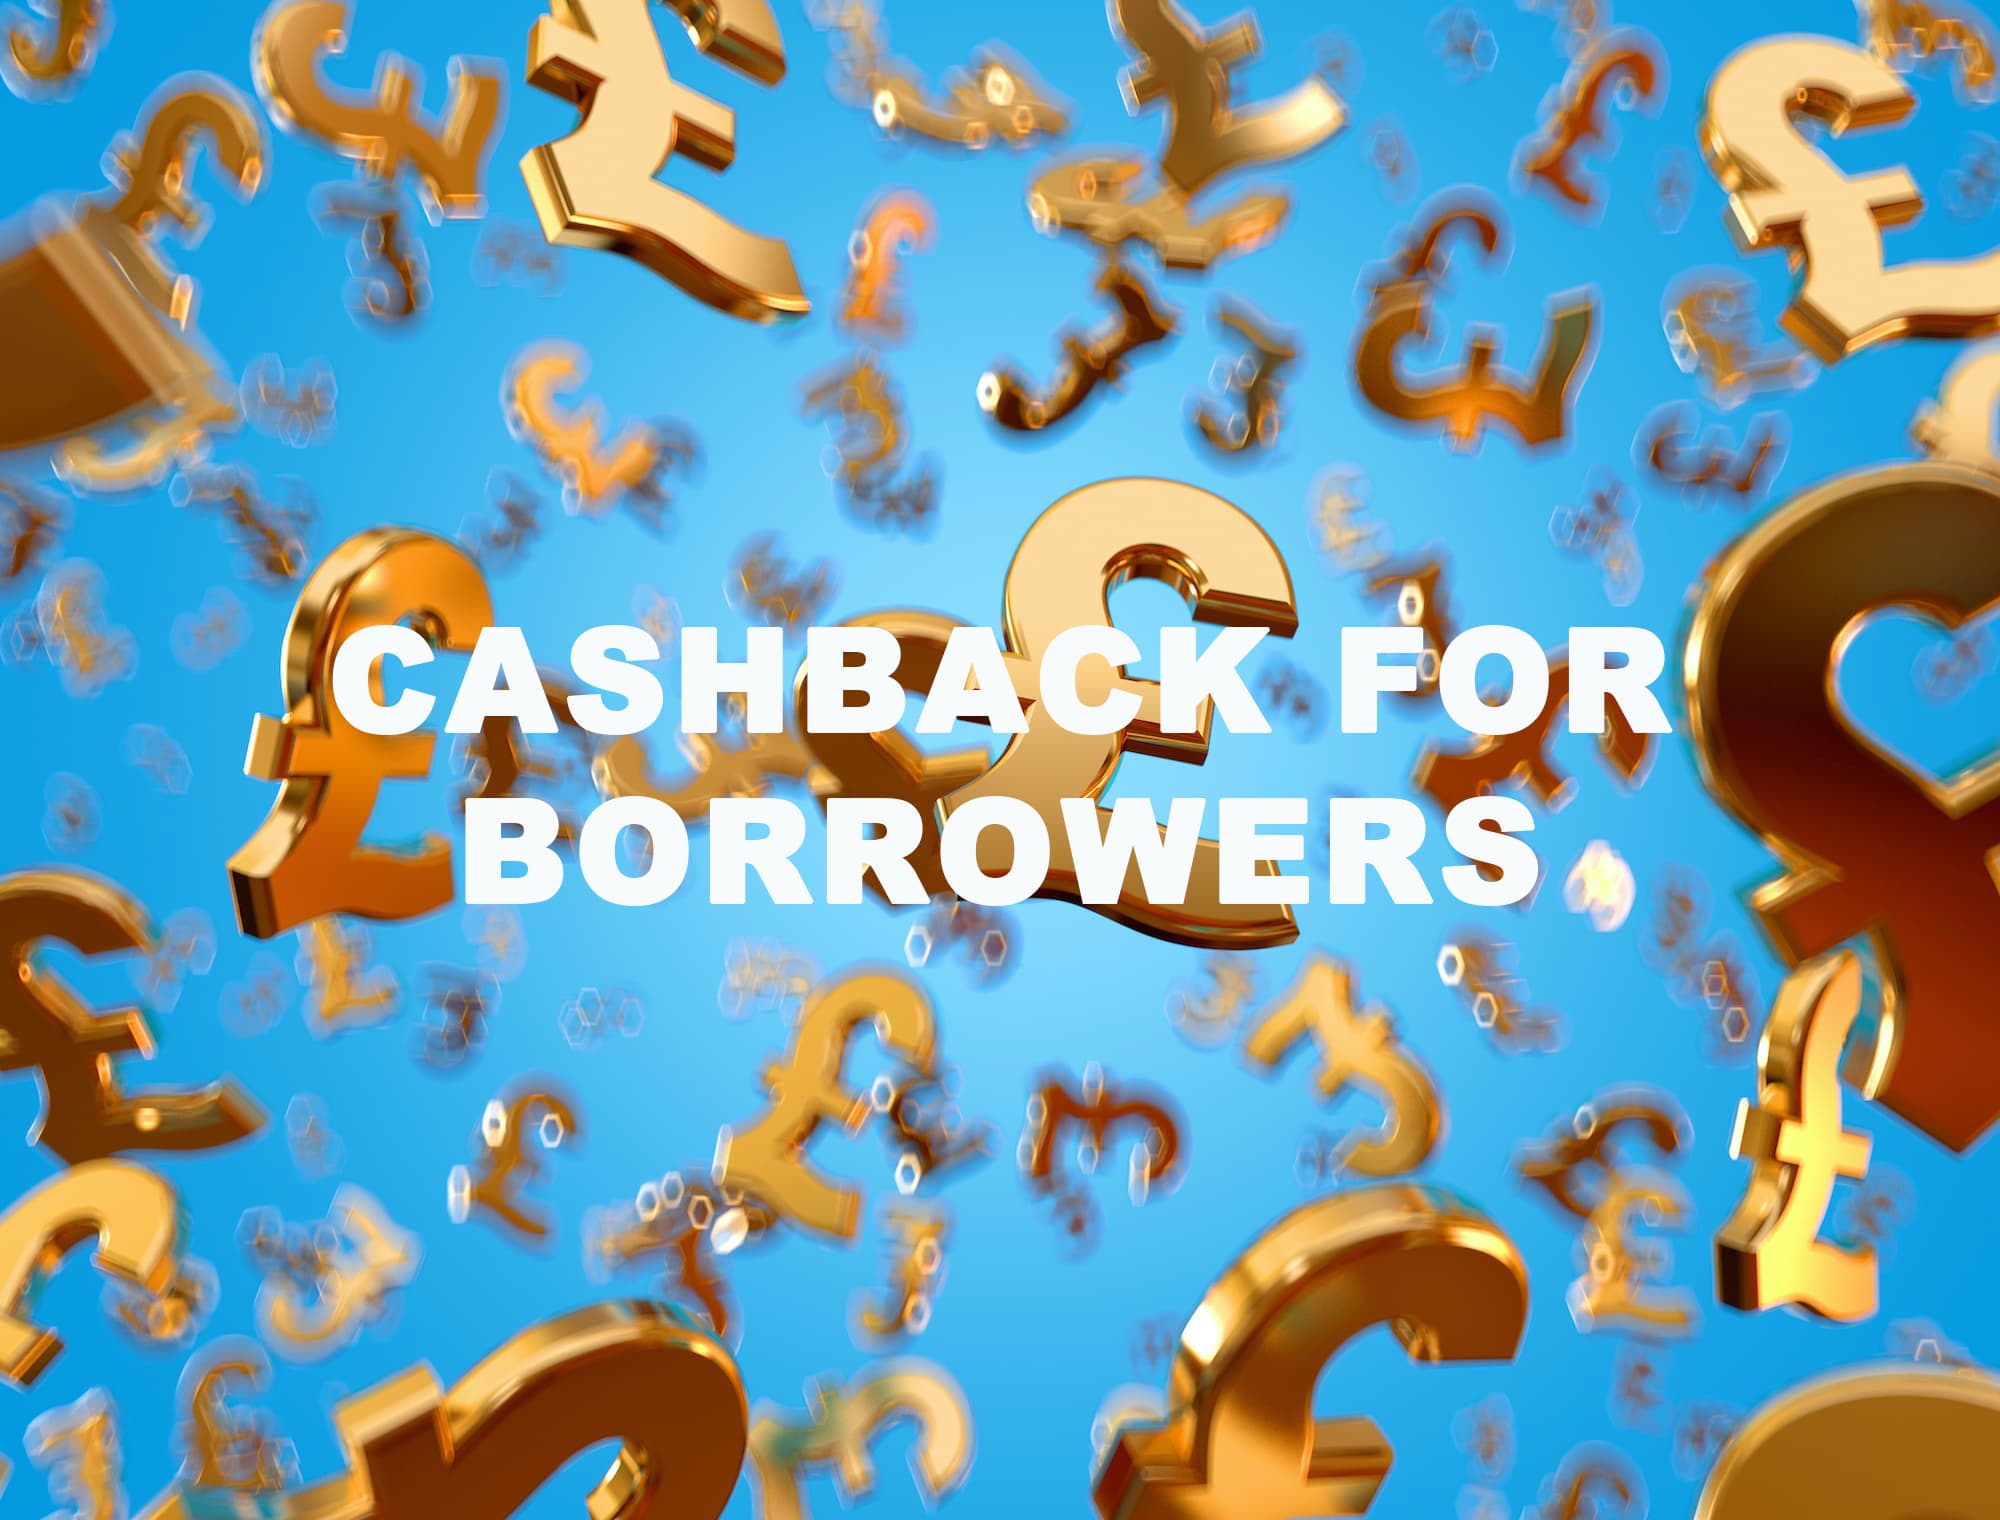 New Cashback incentive for borrowers launched - InvestGrow Financial Services